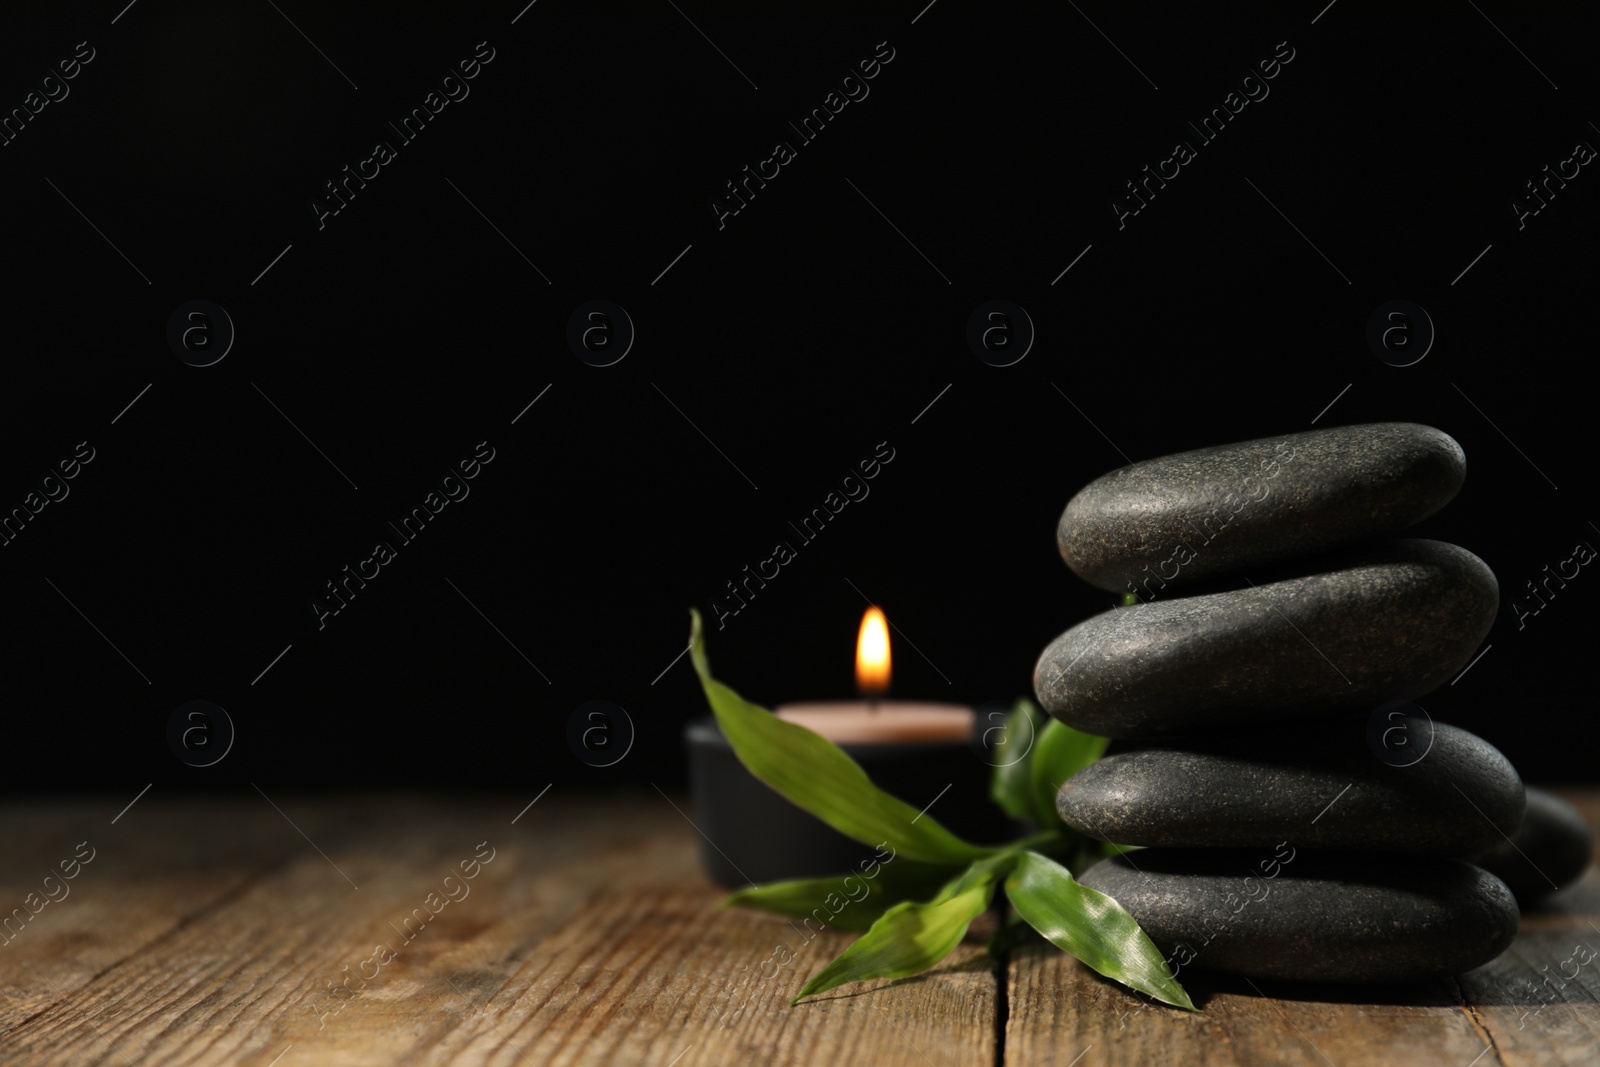 Photo of Spa stones, bamboo sprout and candle on wooden table against dark background, space for text